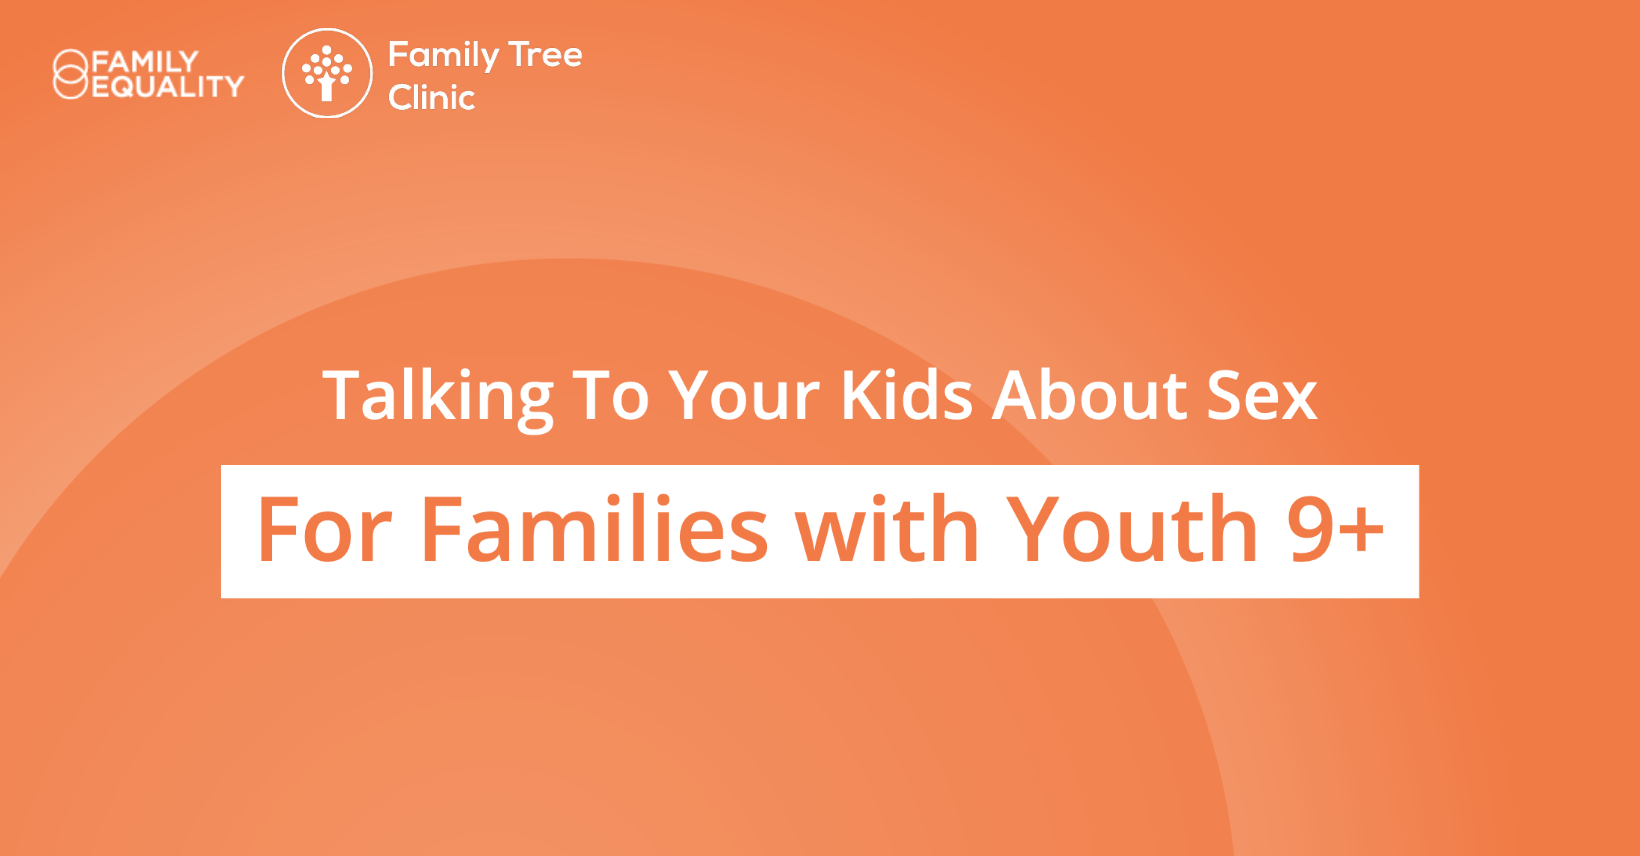 Talking to Your Kids About Sex for Families with Youth Ages 9+